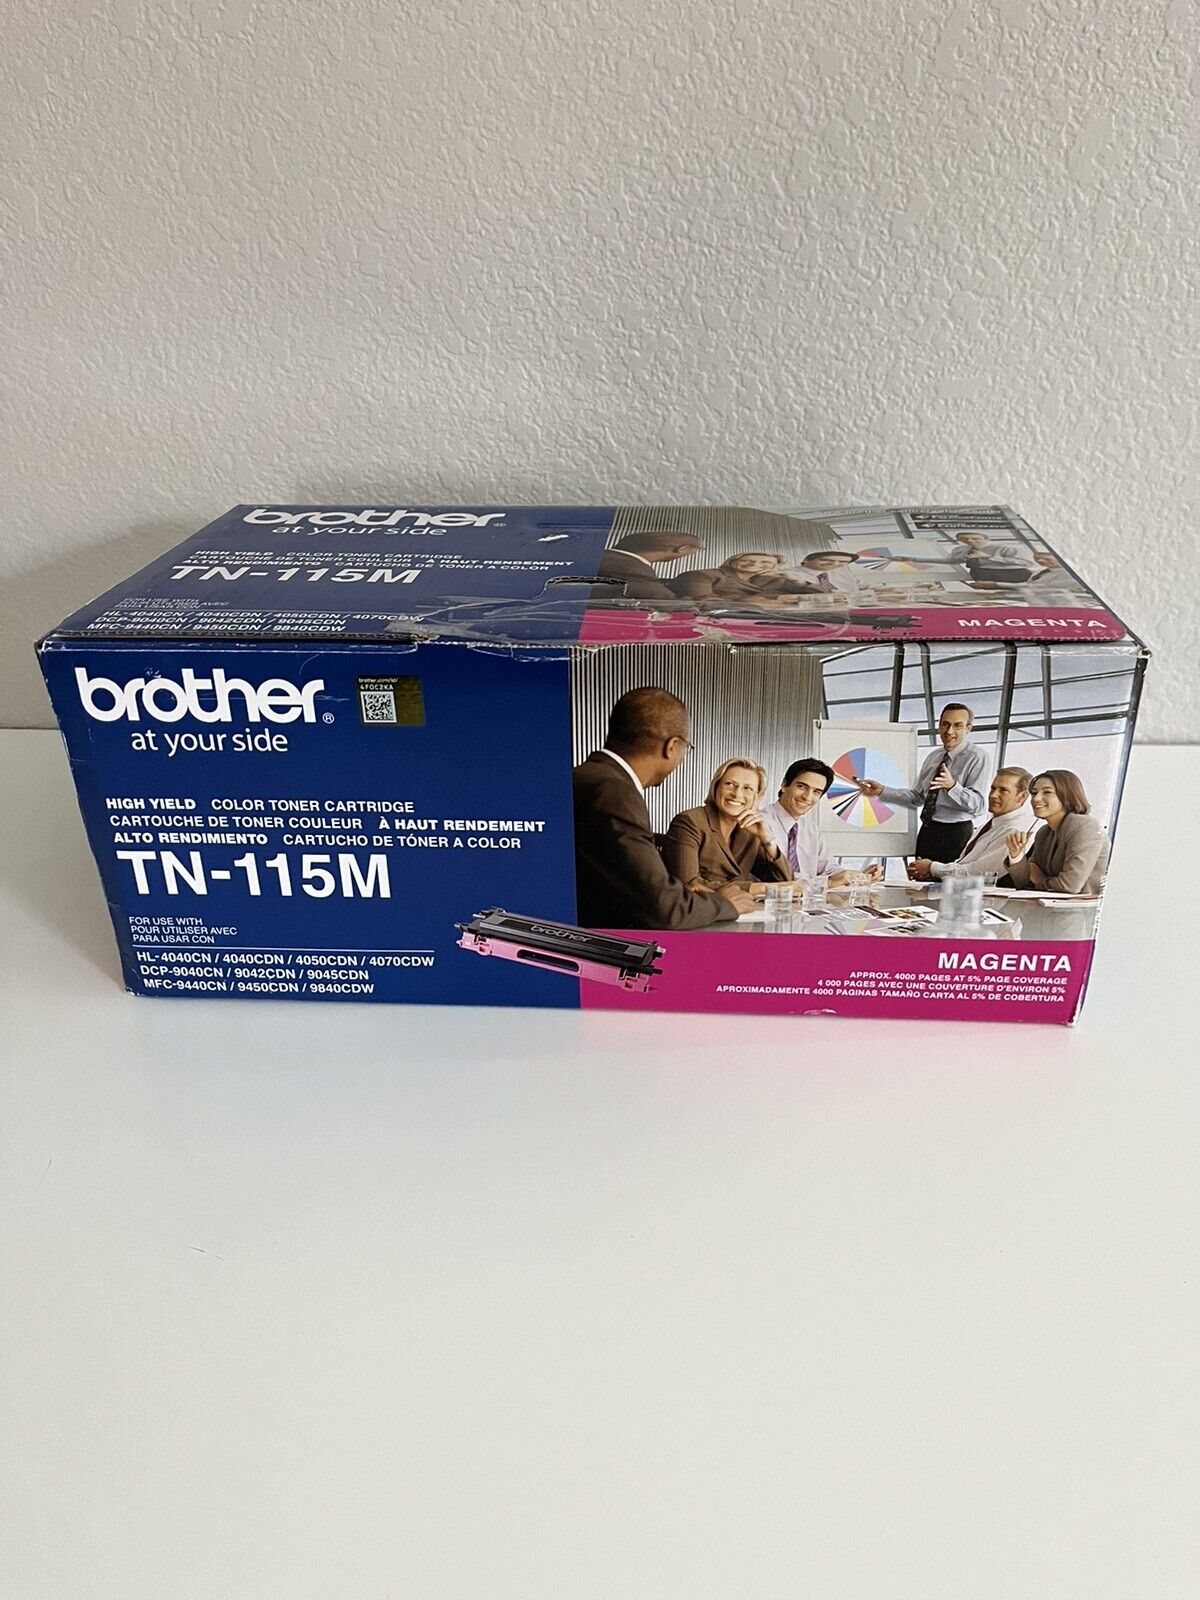 NEW Brother TN-115M Magenta Toner for DCP-9040 9042 9045